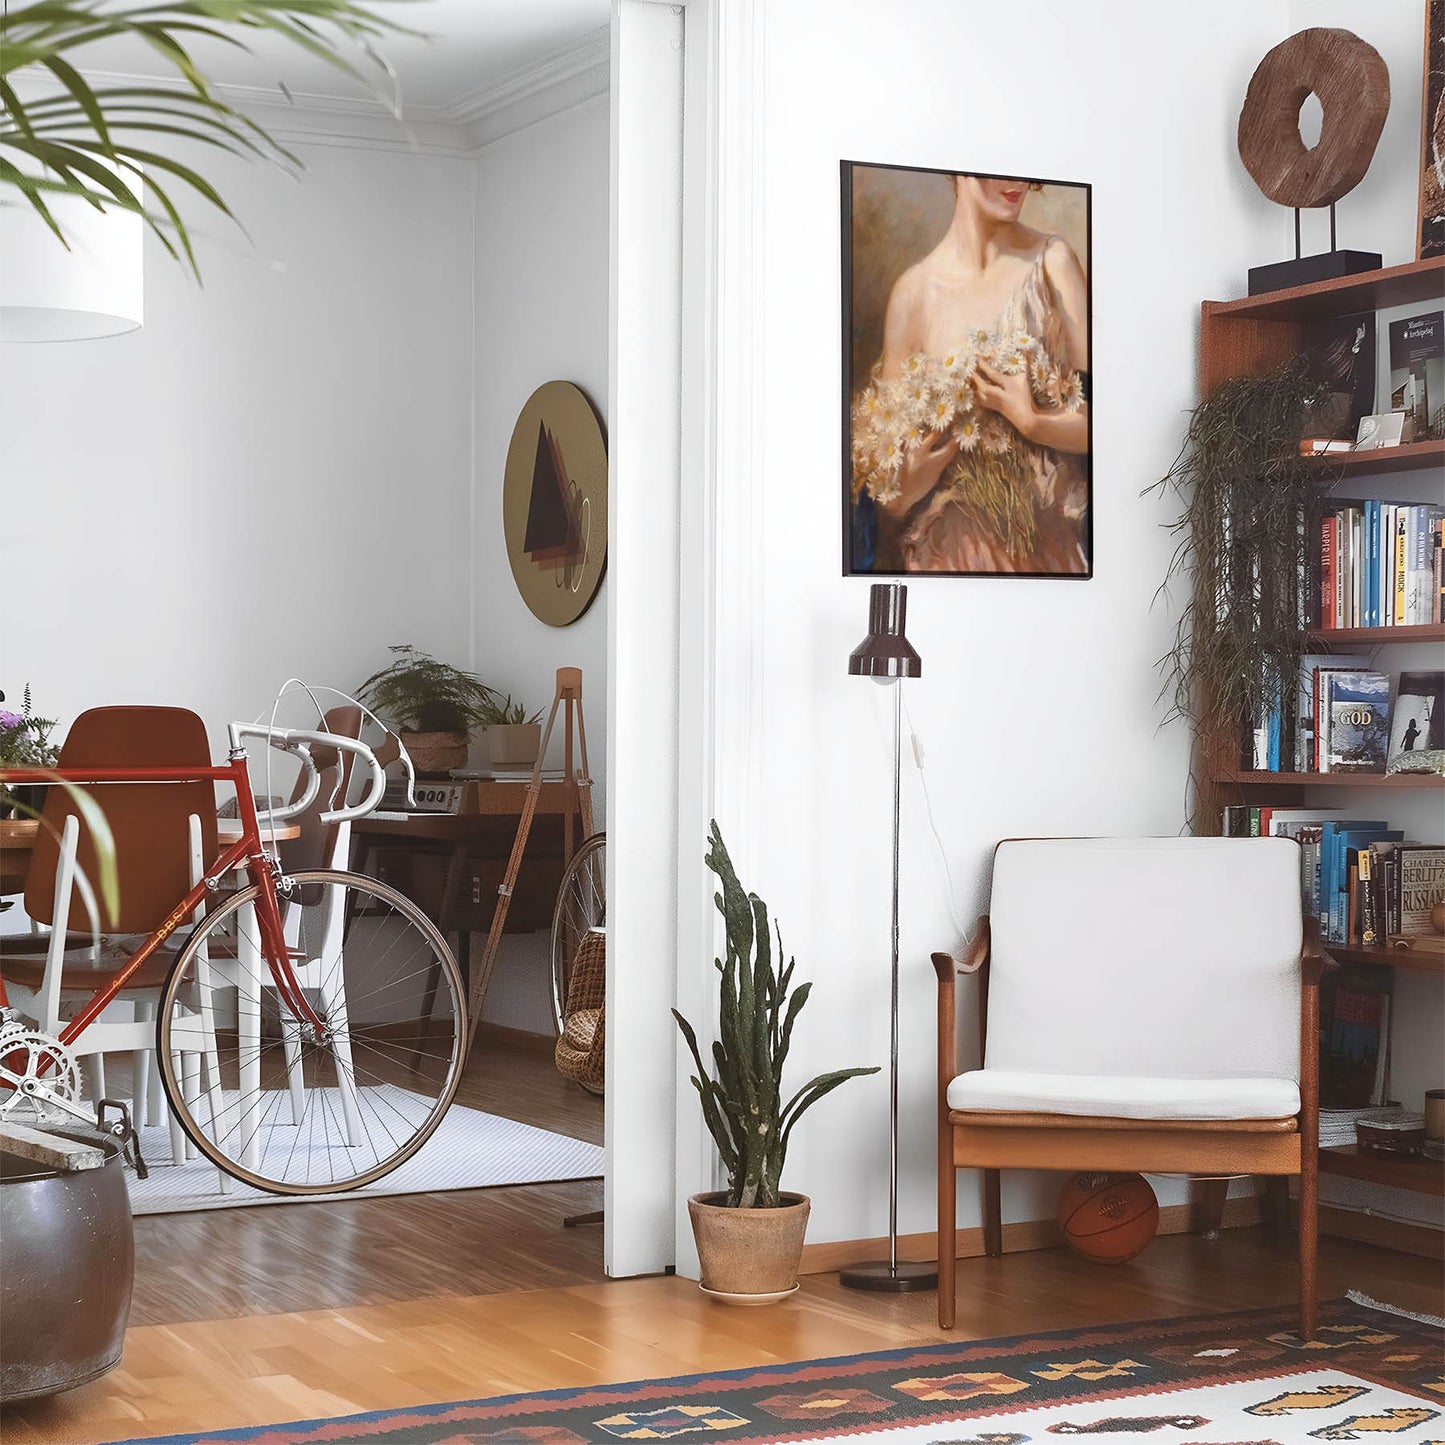 Eclectic living room with a road bike, bookshelf and house plants that features framed artwork of a Woman Holding Daisies above a chair and lamp